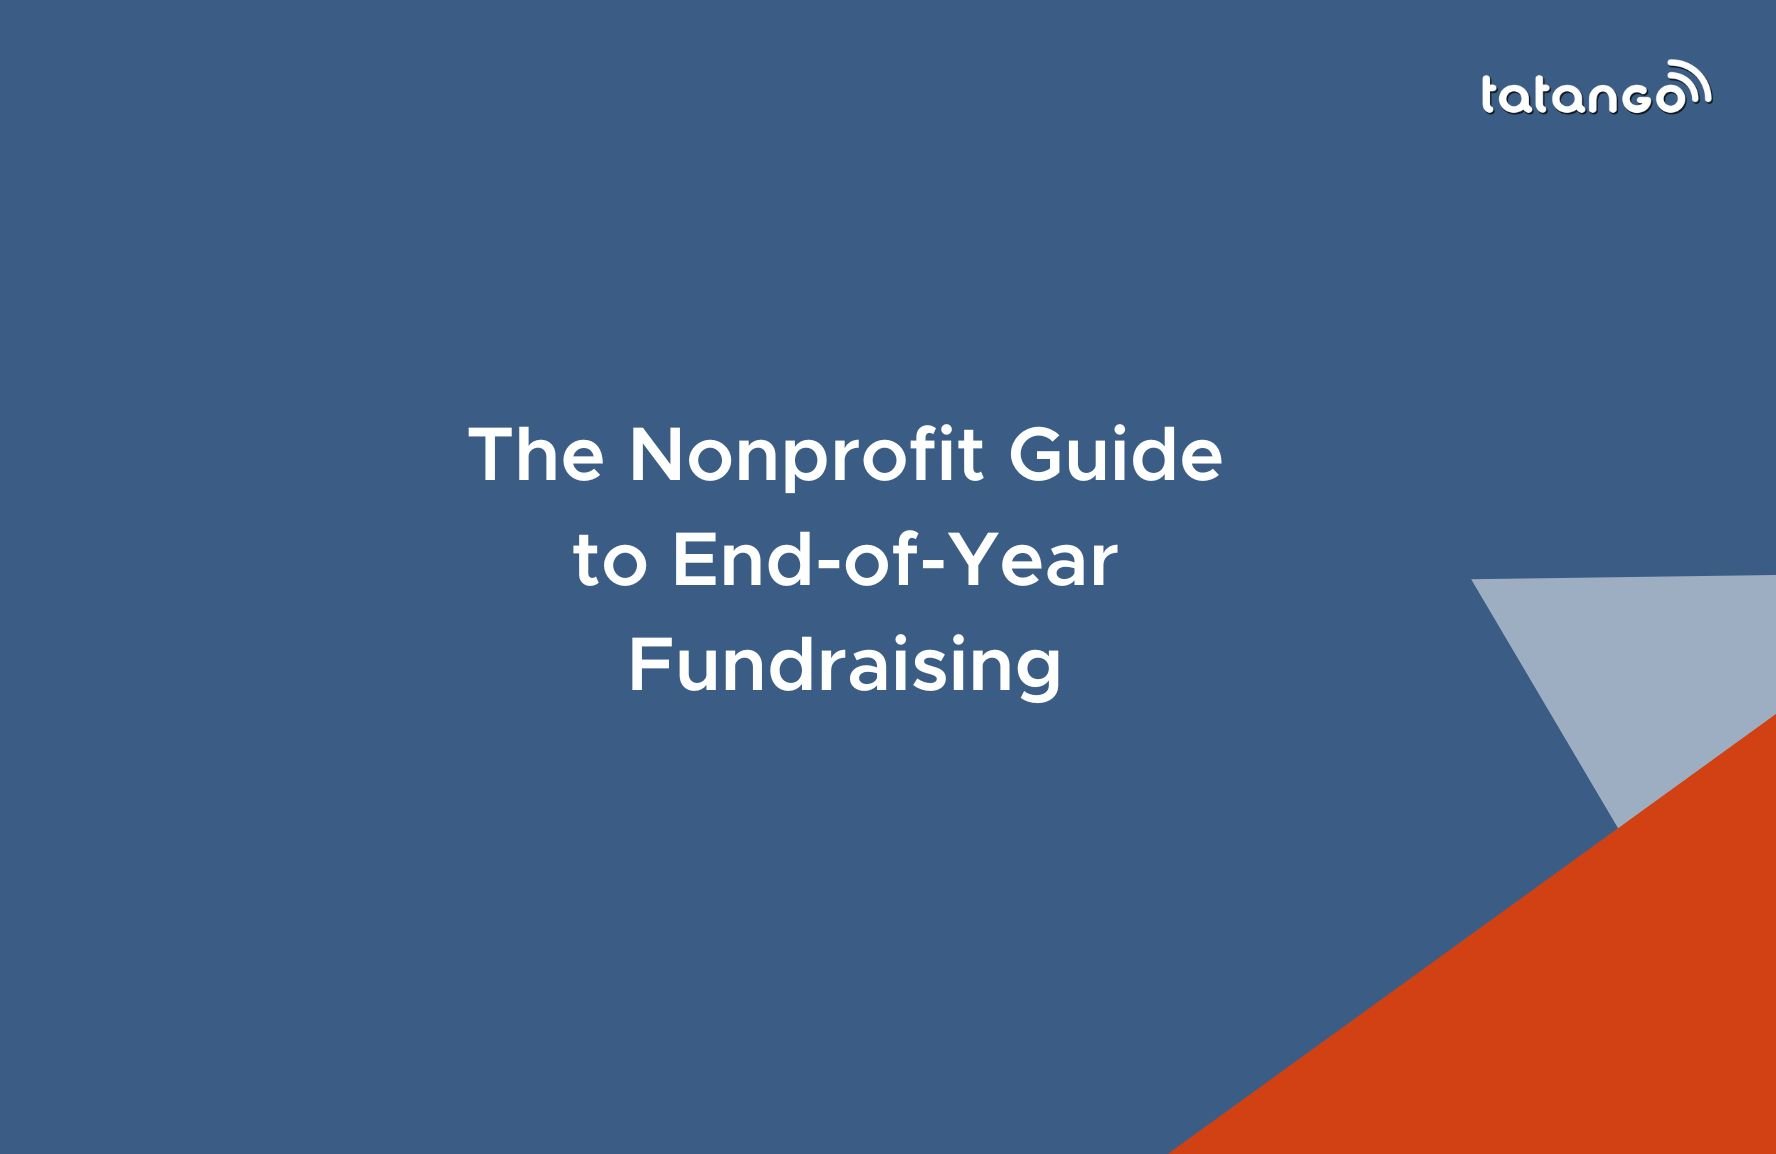 The Nonprofit Guide to End-of-Year Fundraising